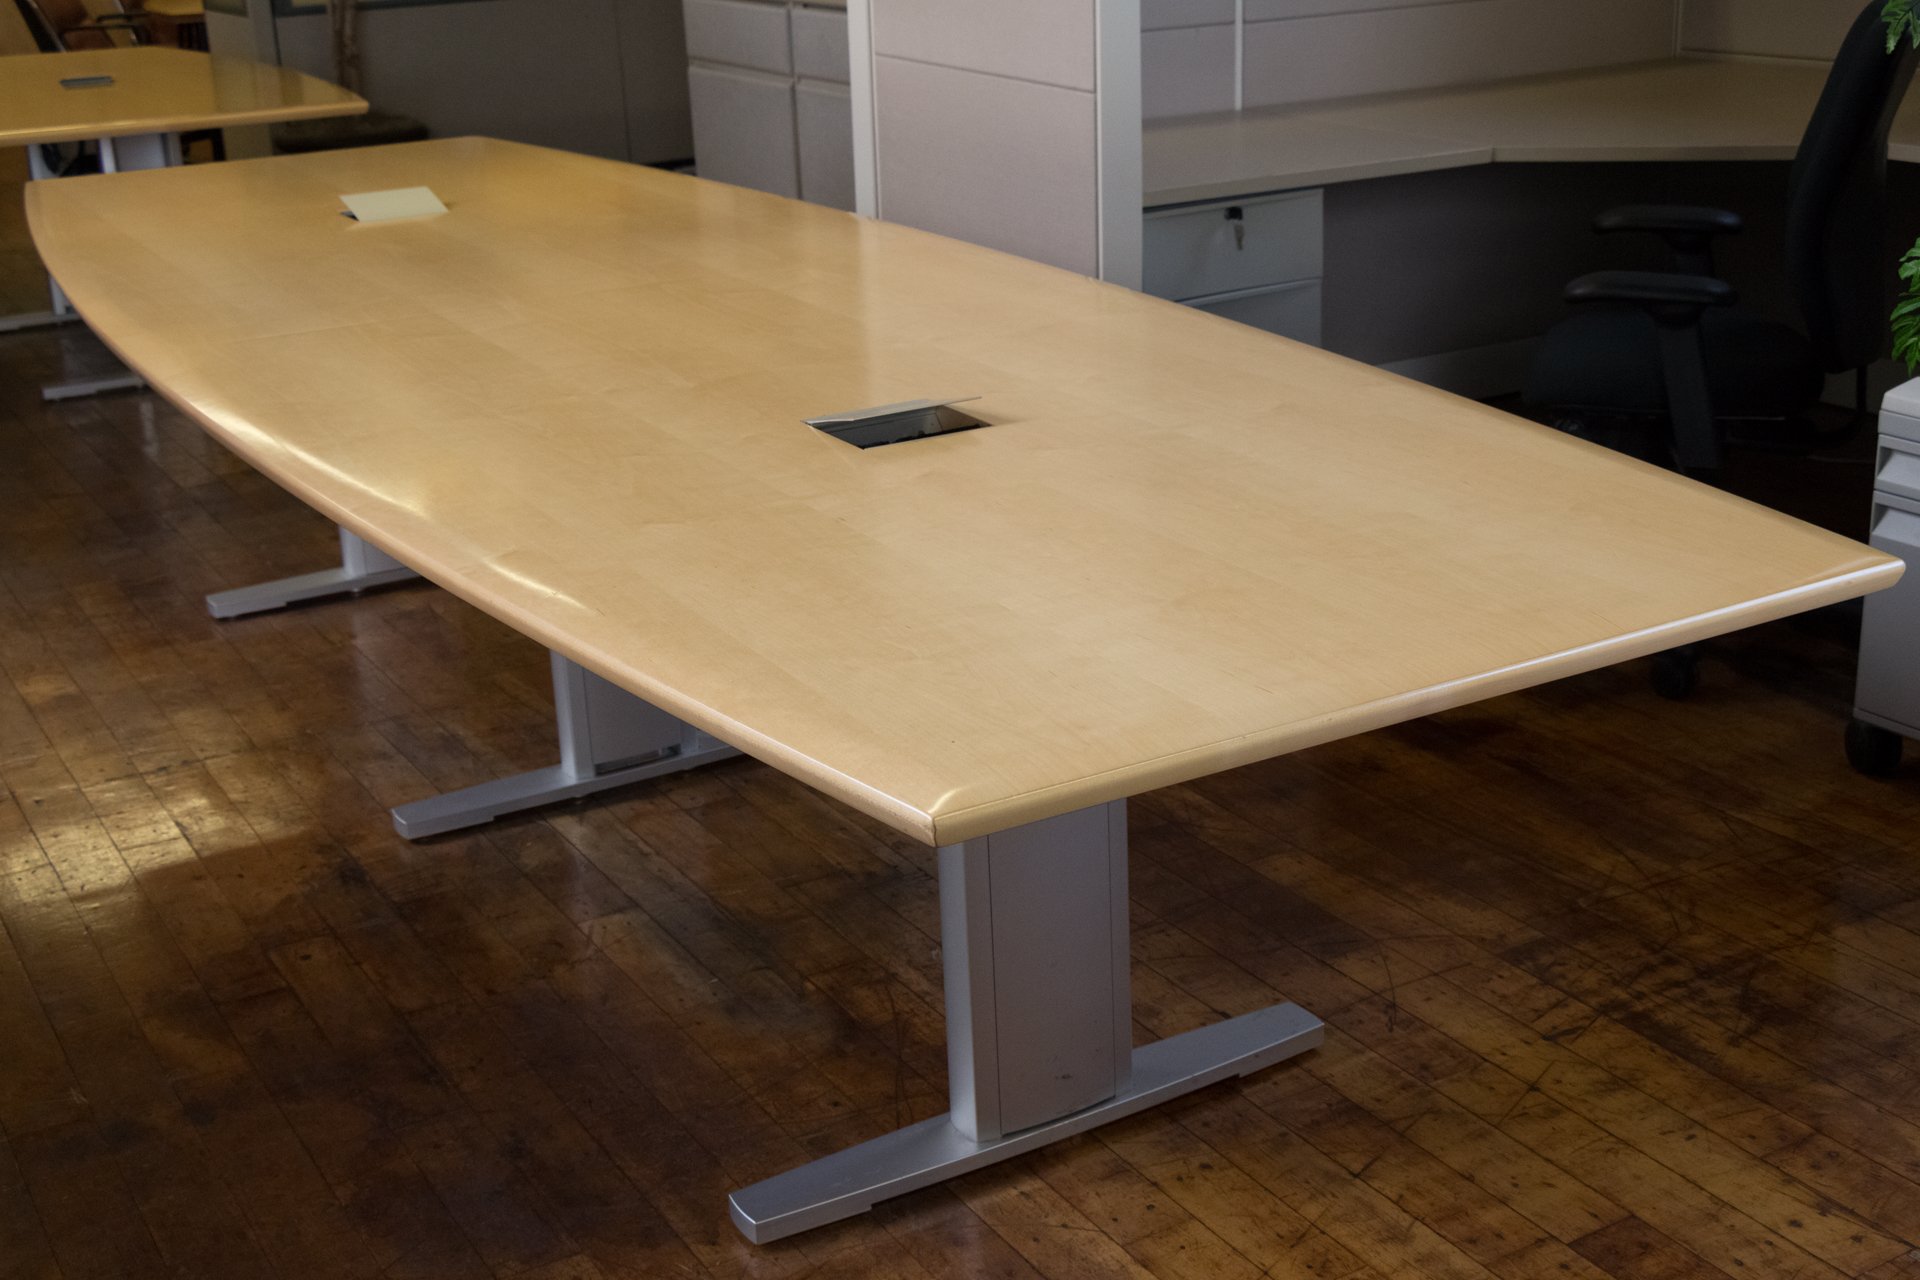 12′ Neinkamper Maple Conference Table with TeleData Forums